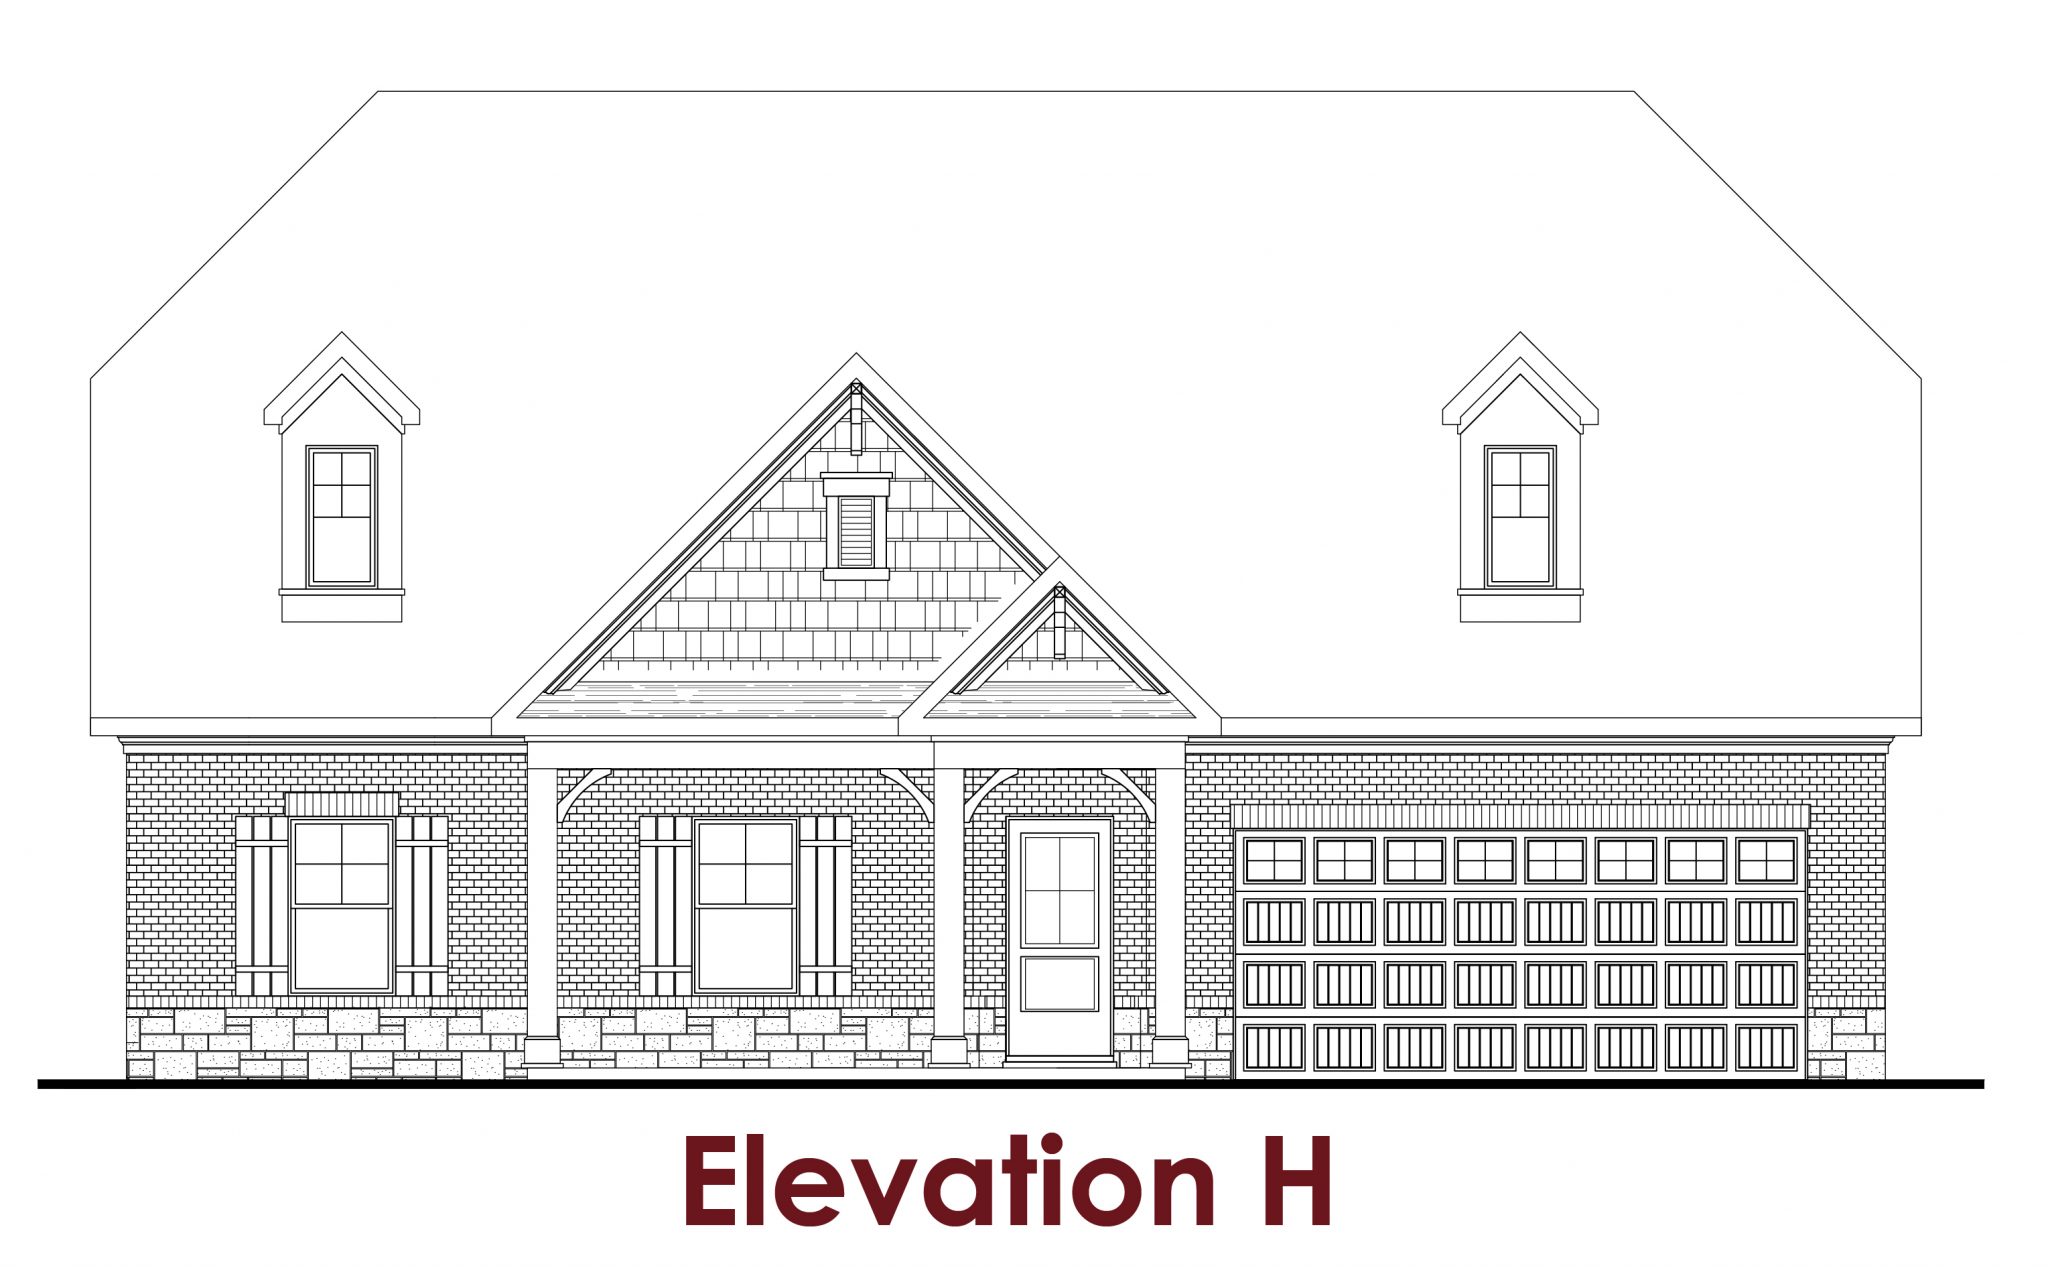 Oxford elevations Image